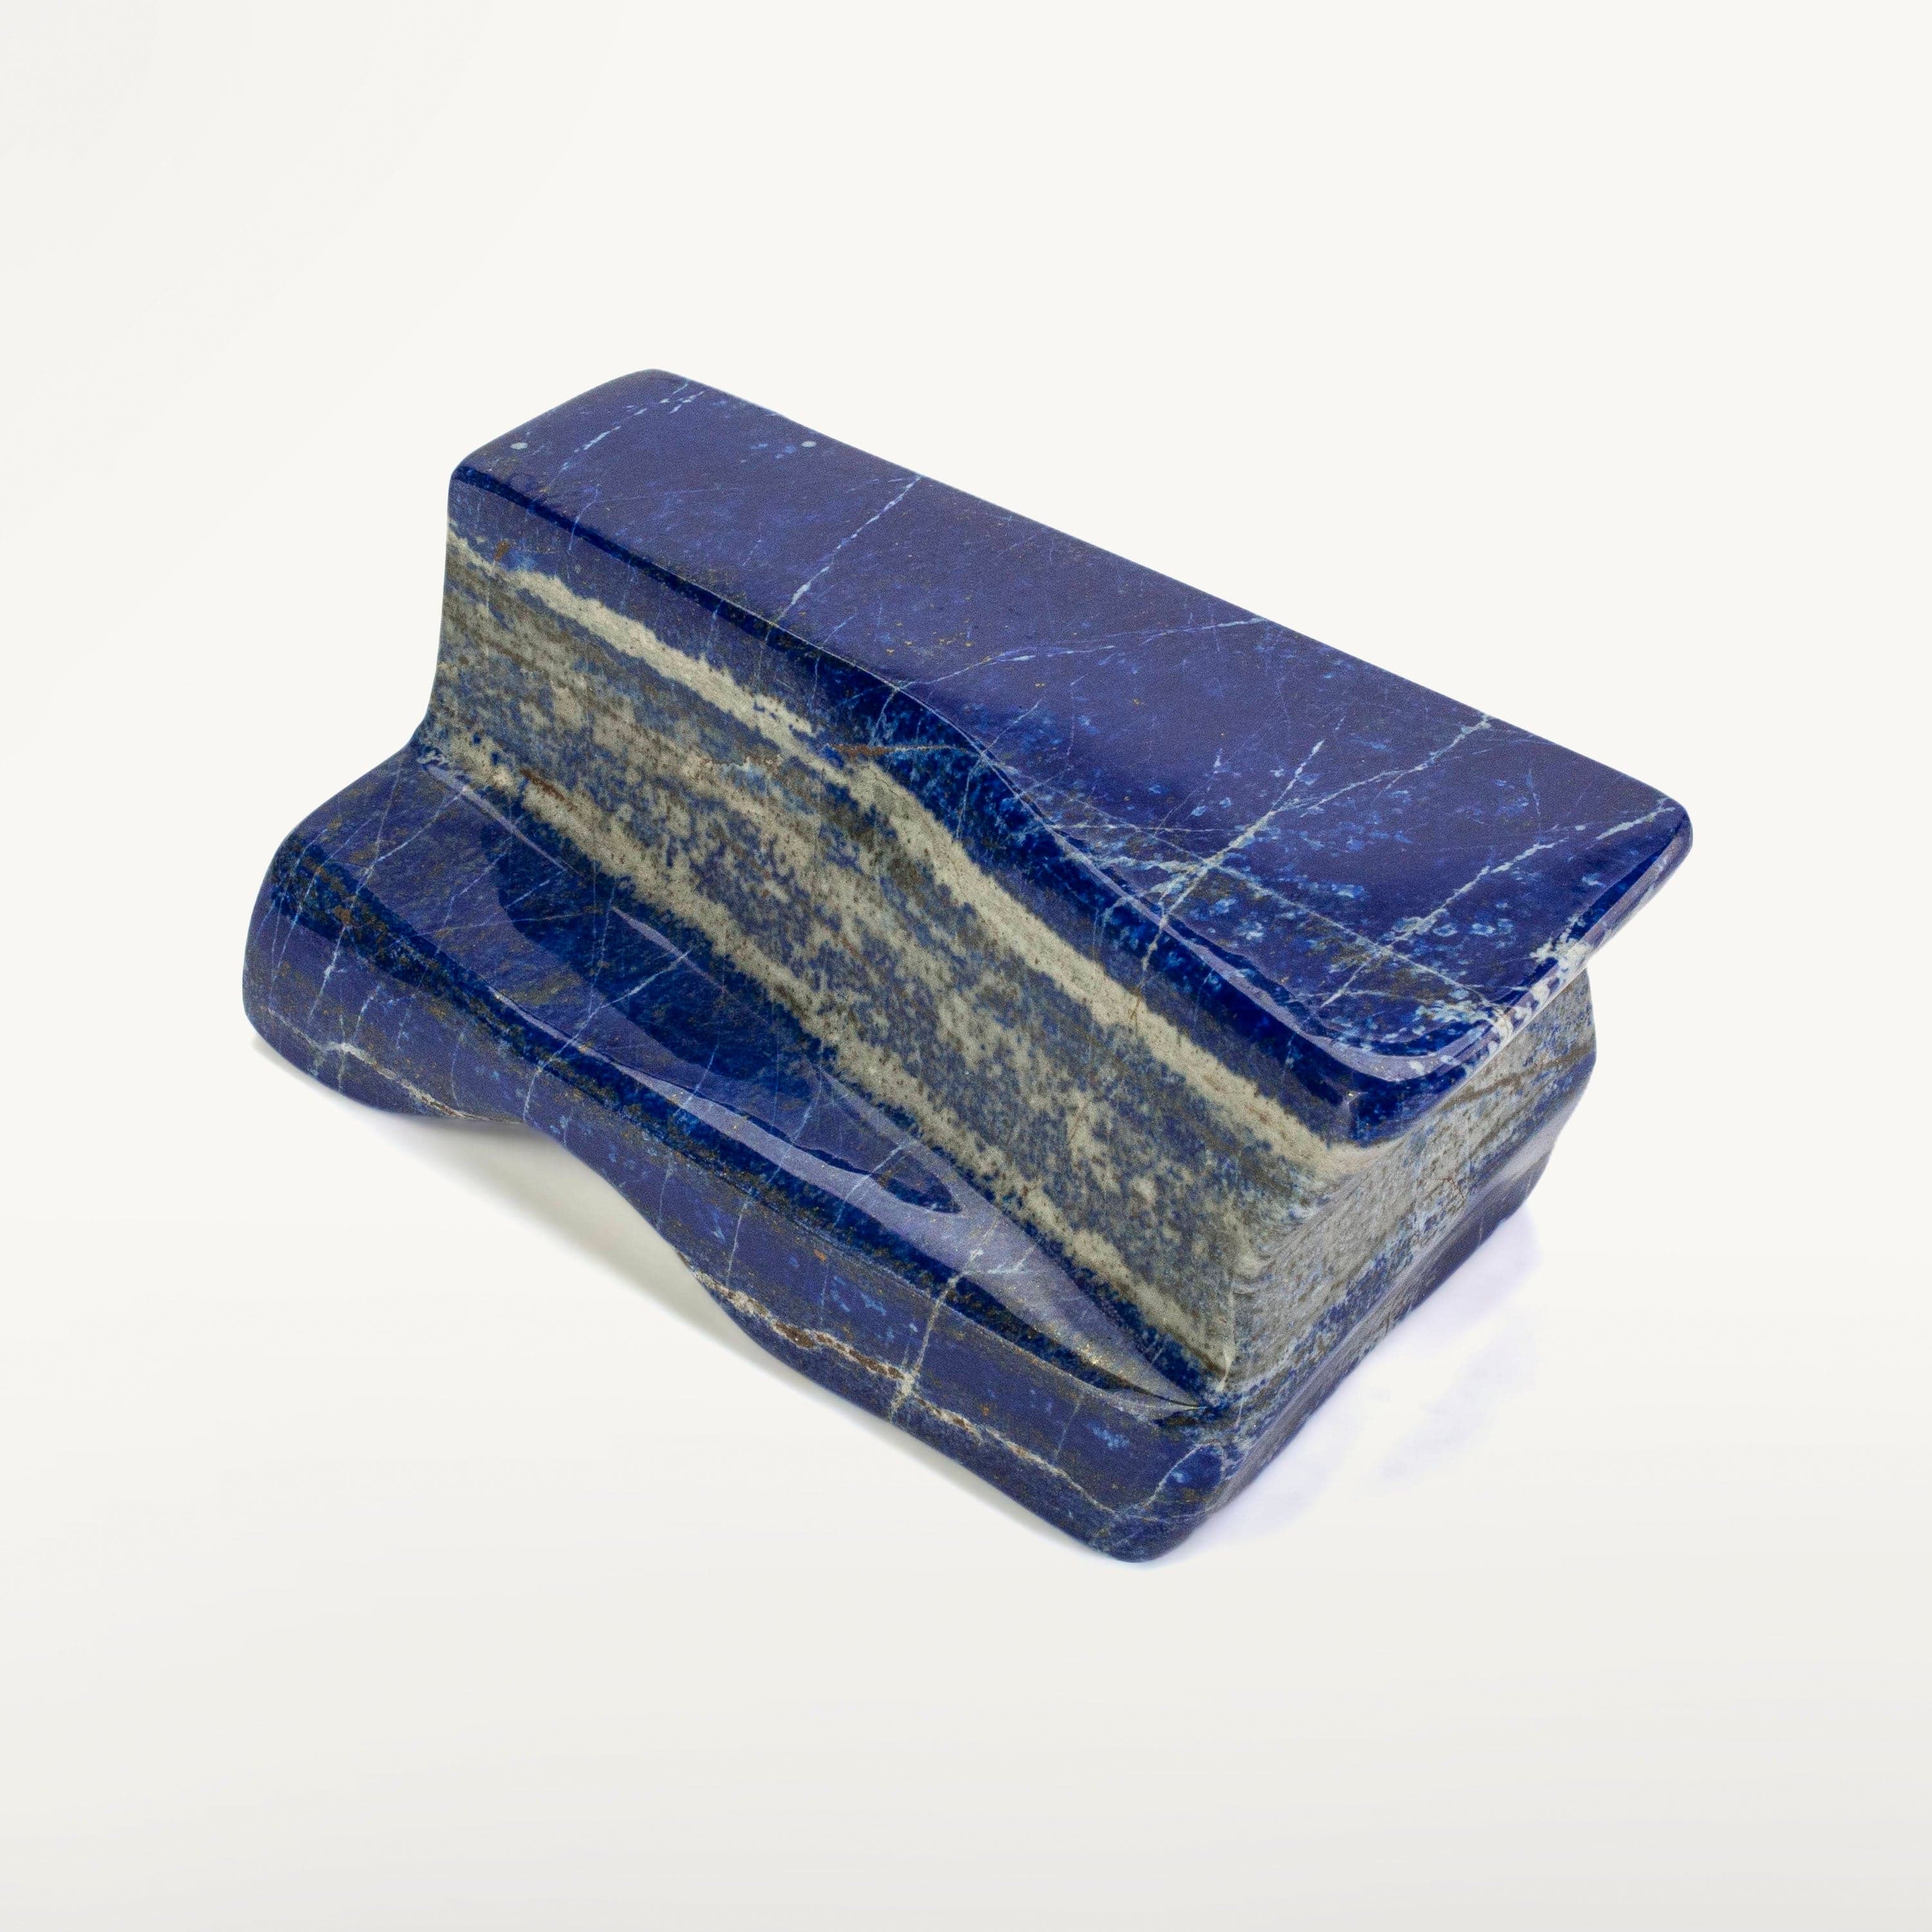 Kalifano Lapis Lapis Lazuil Freeform from Afghanistan - 1.5 kg / 3.2 lbs LP1600.002